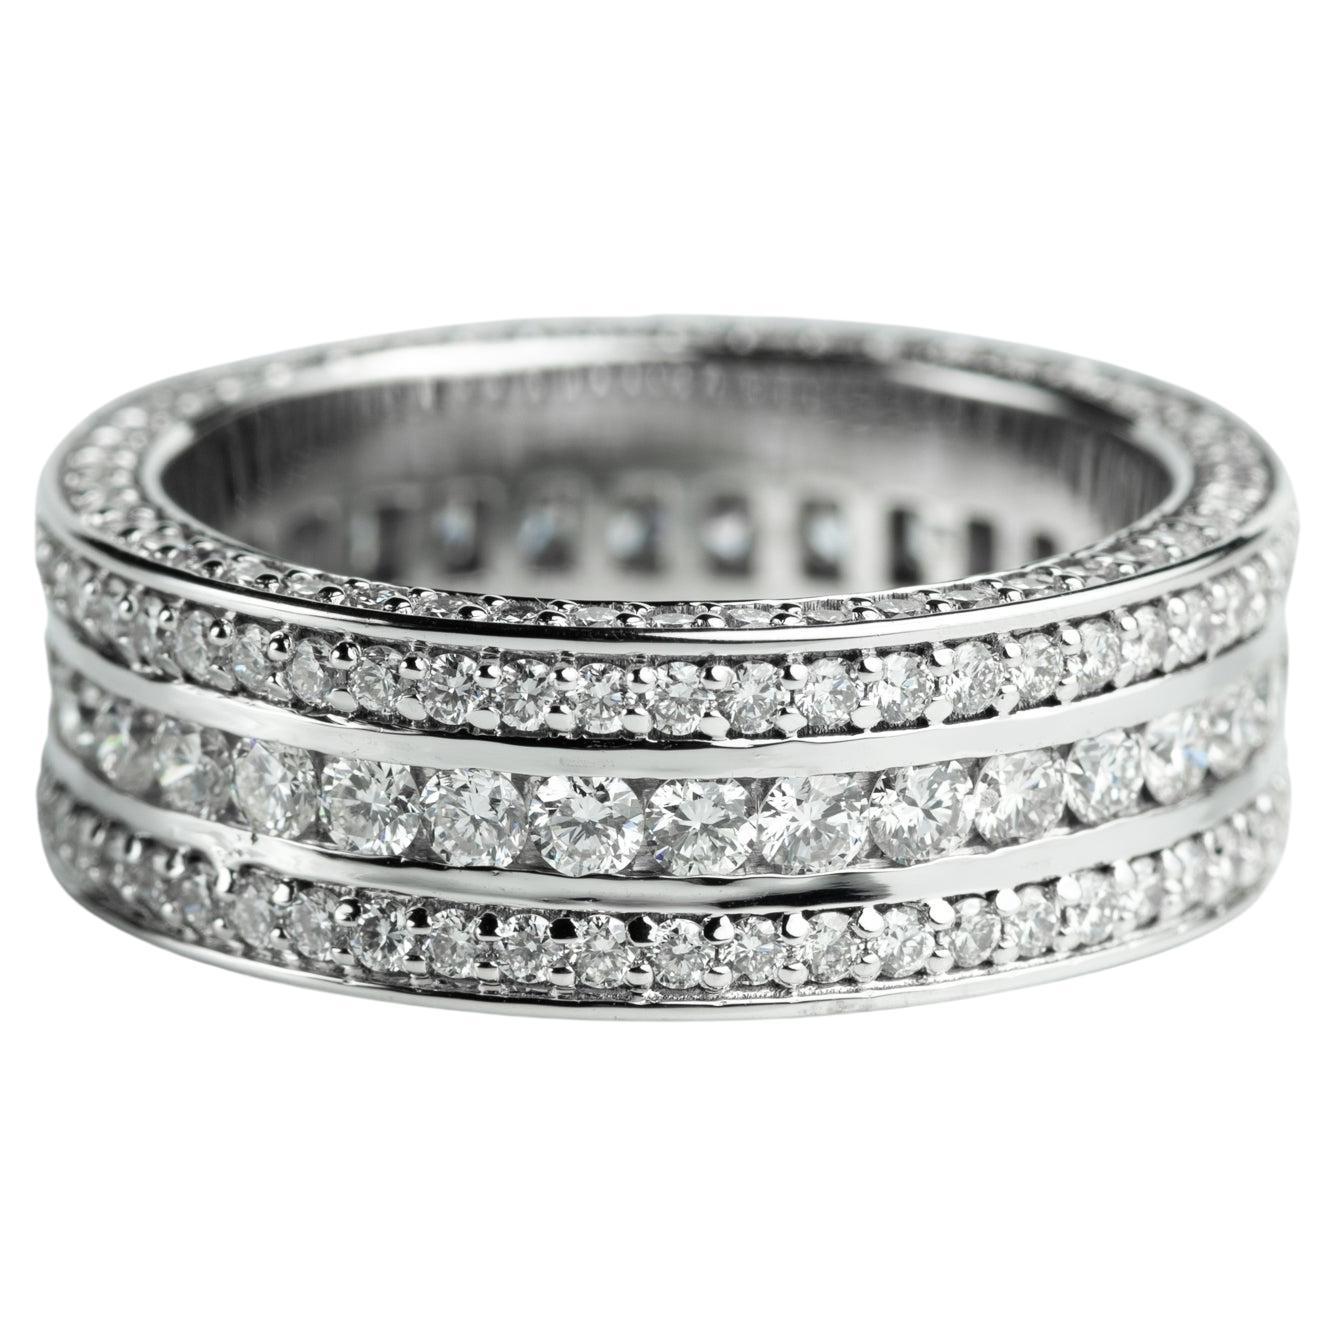 Mens diamond wedding ring in 18k White gold, Iced Out Chunky wedding ring